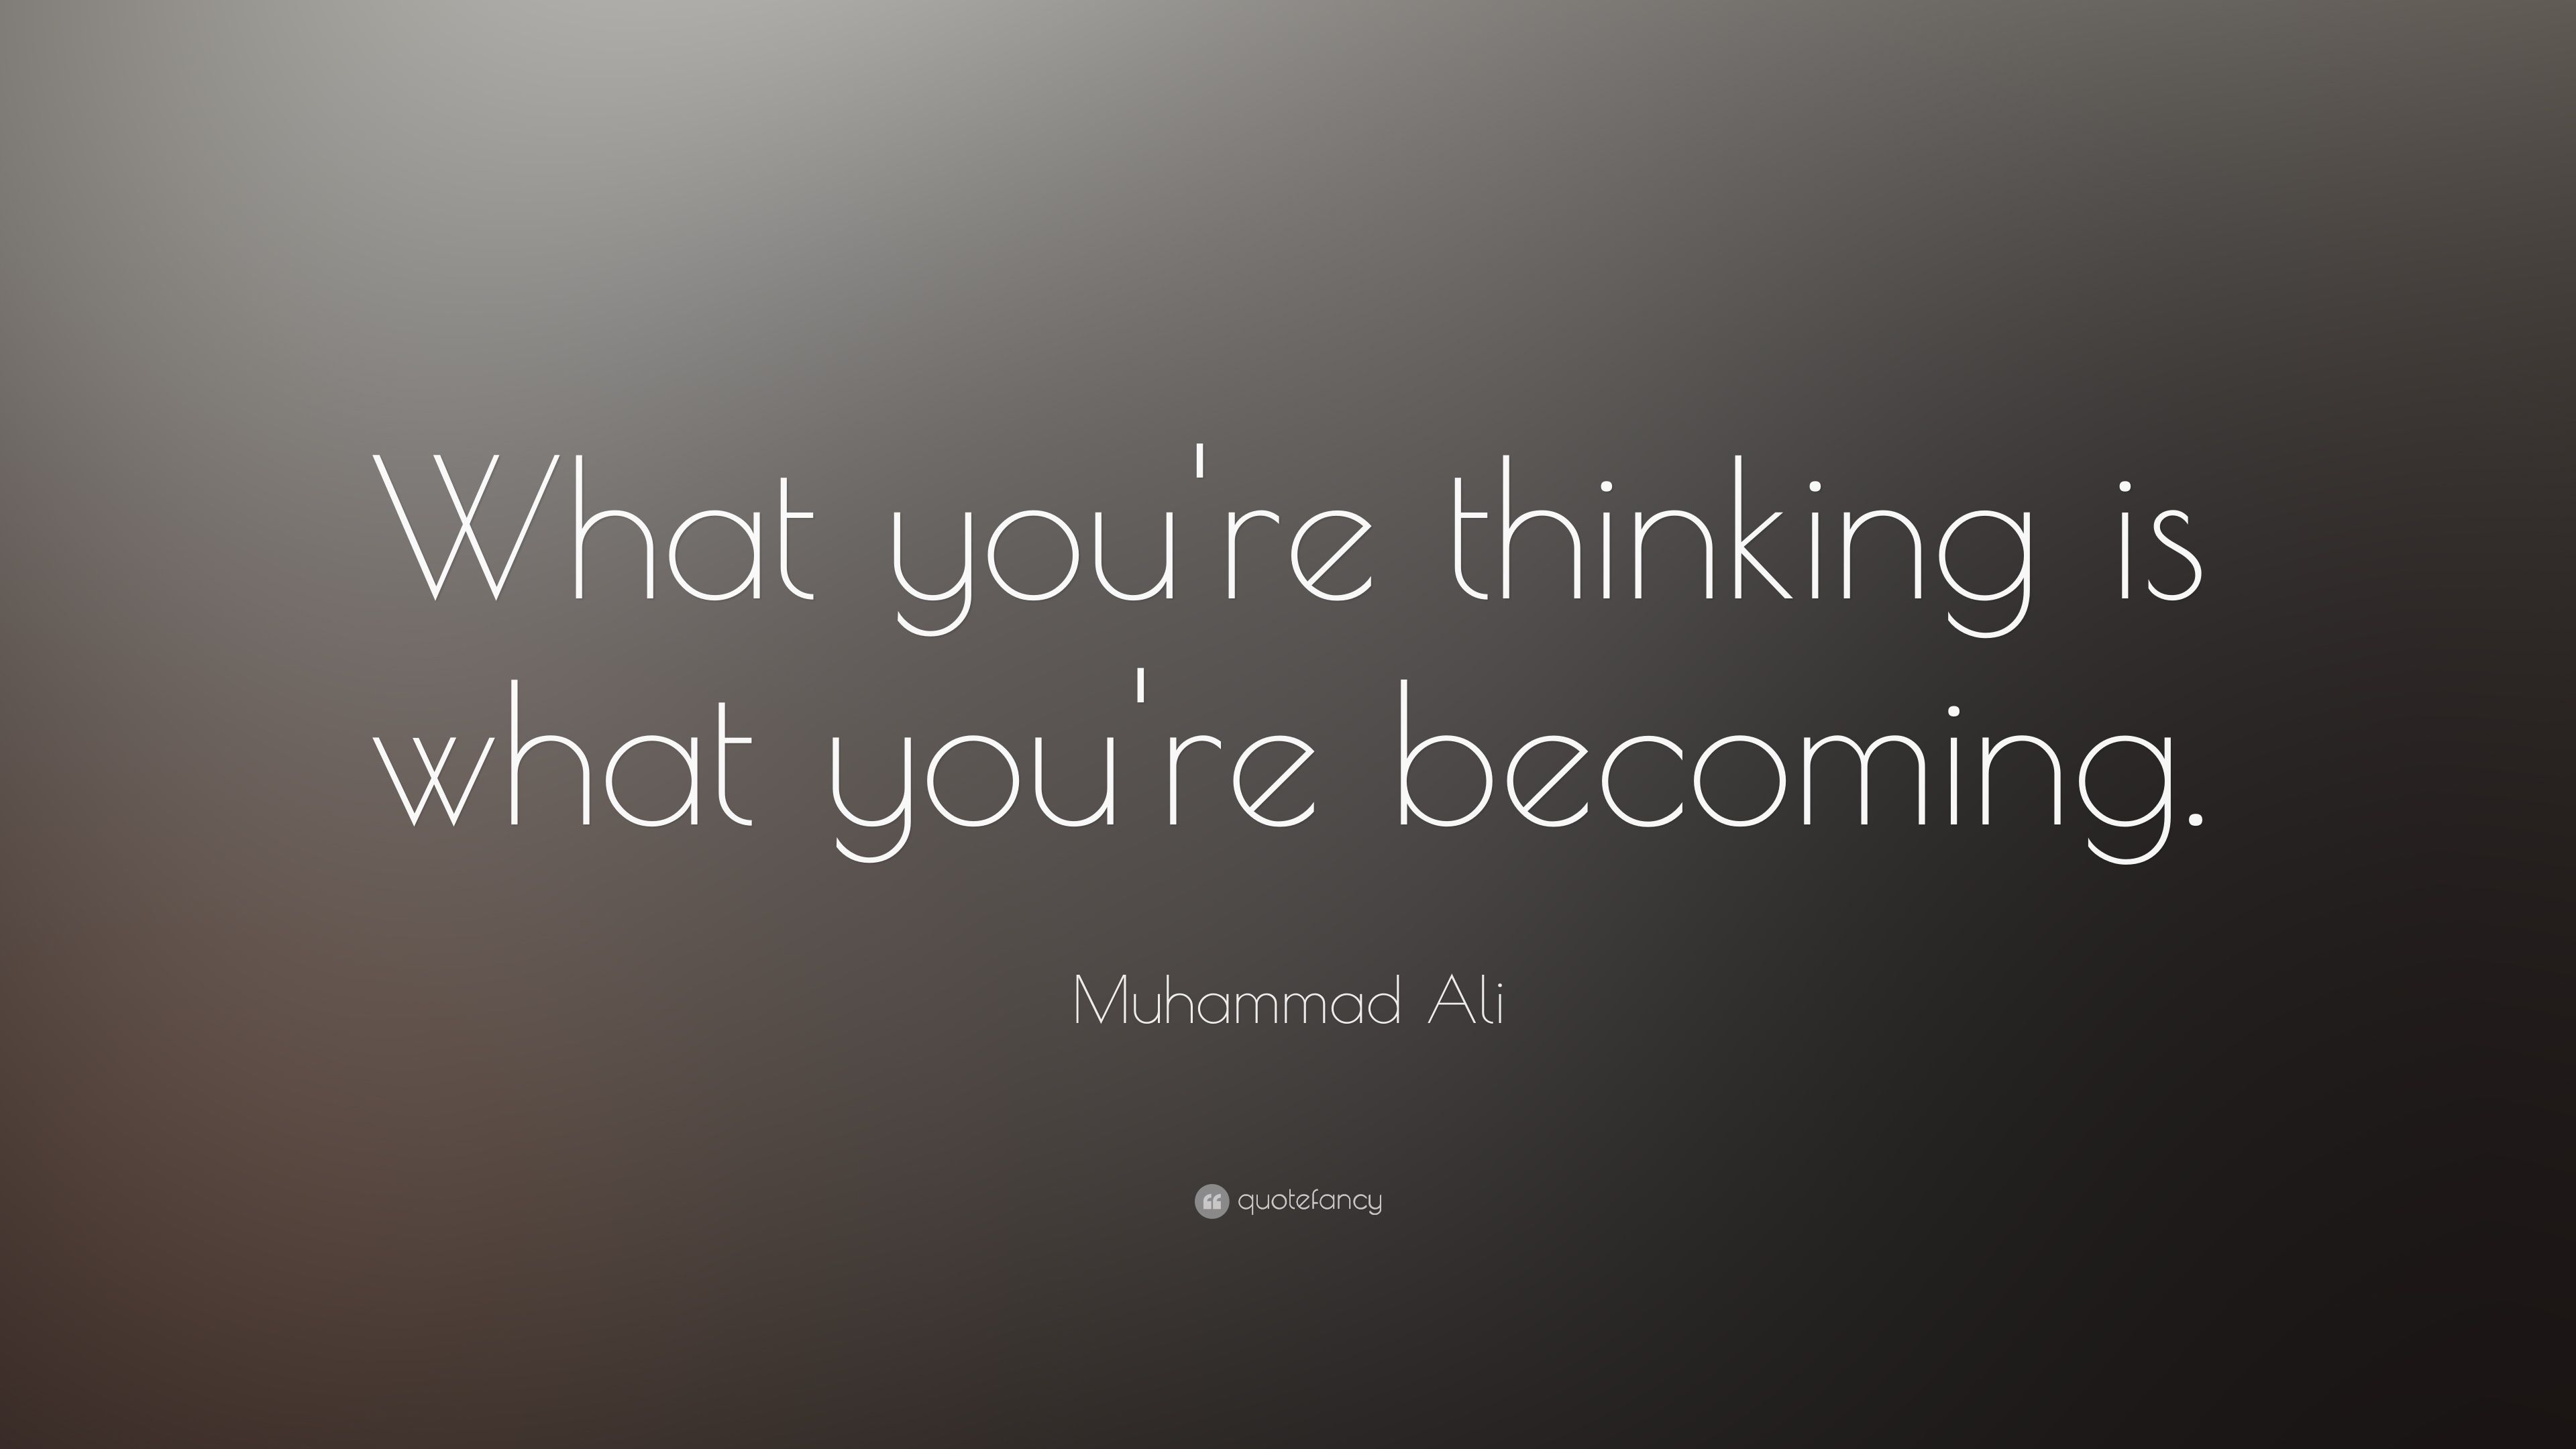 Muhammad Ali Quote: “What you're thinking is what you're becoming ...